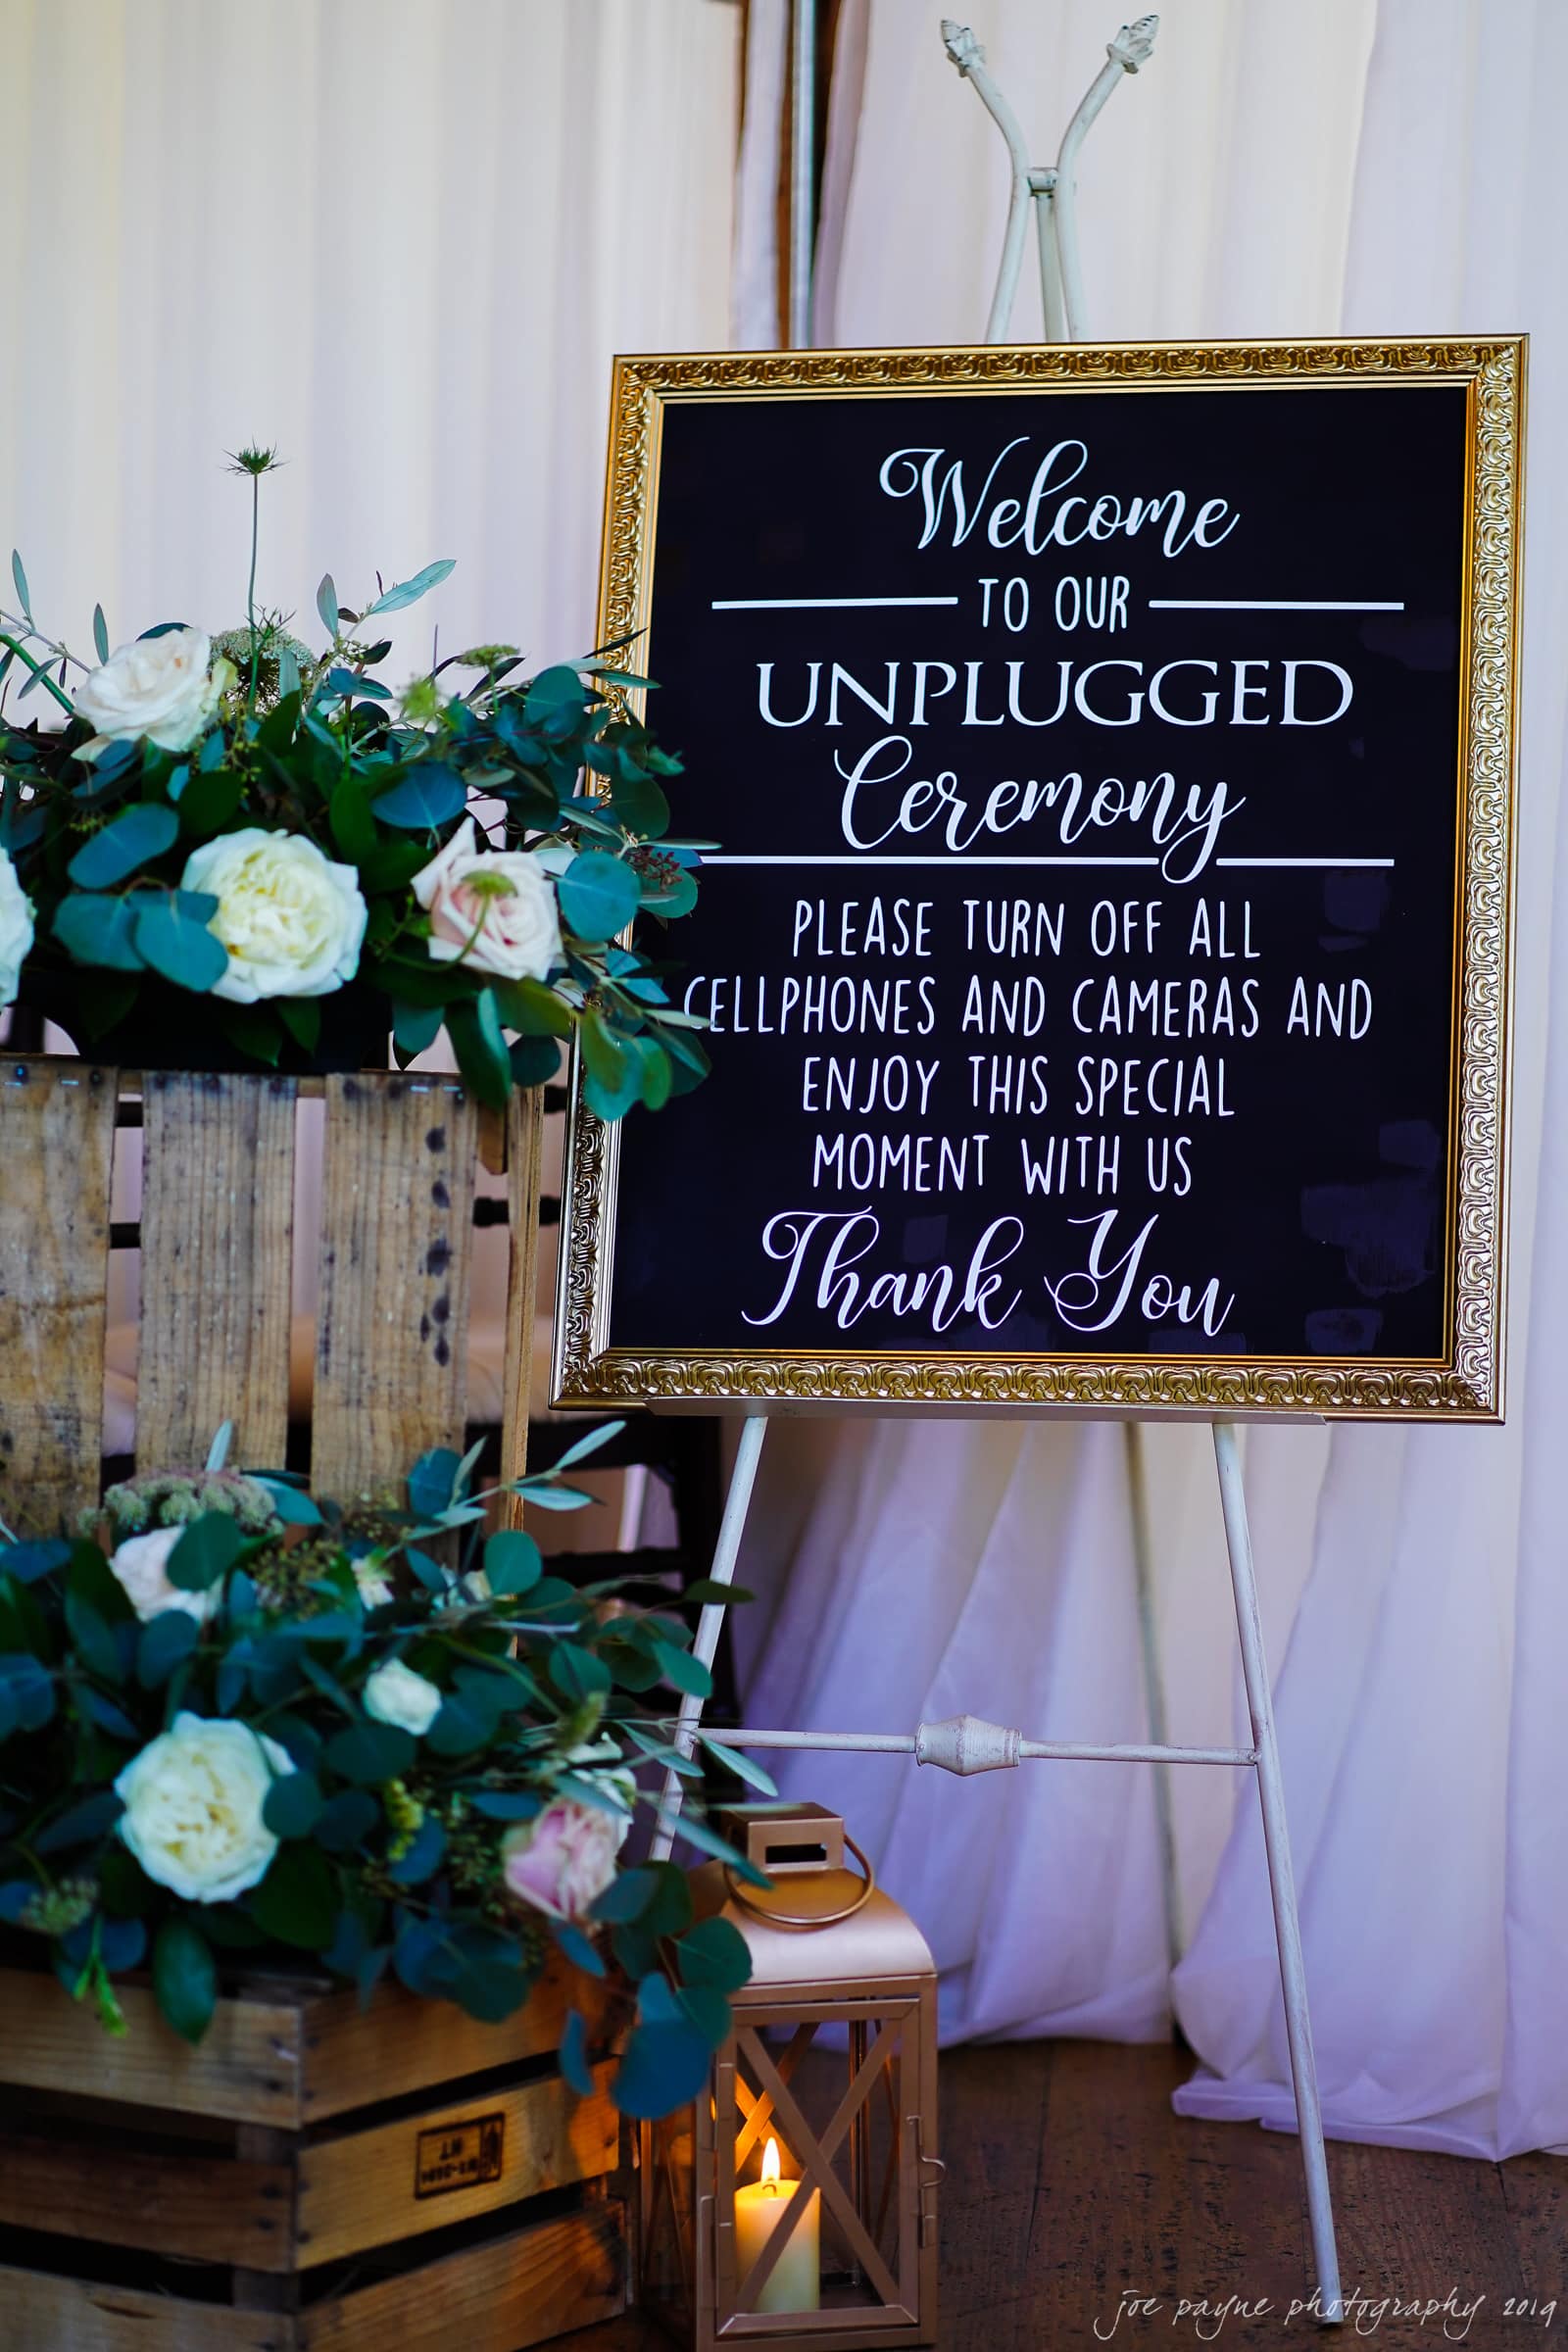 Wedding "Presence": The Advantages of an Unplugged Wedding